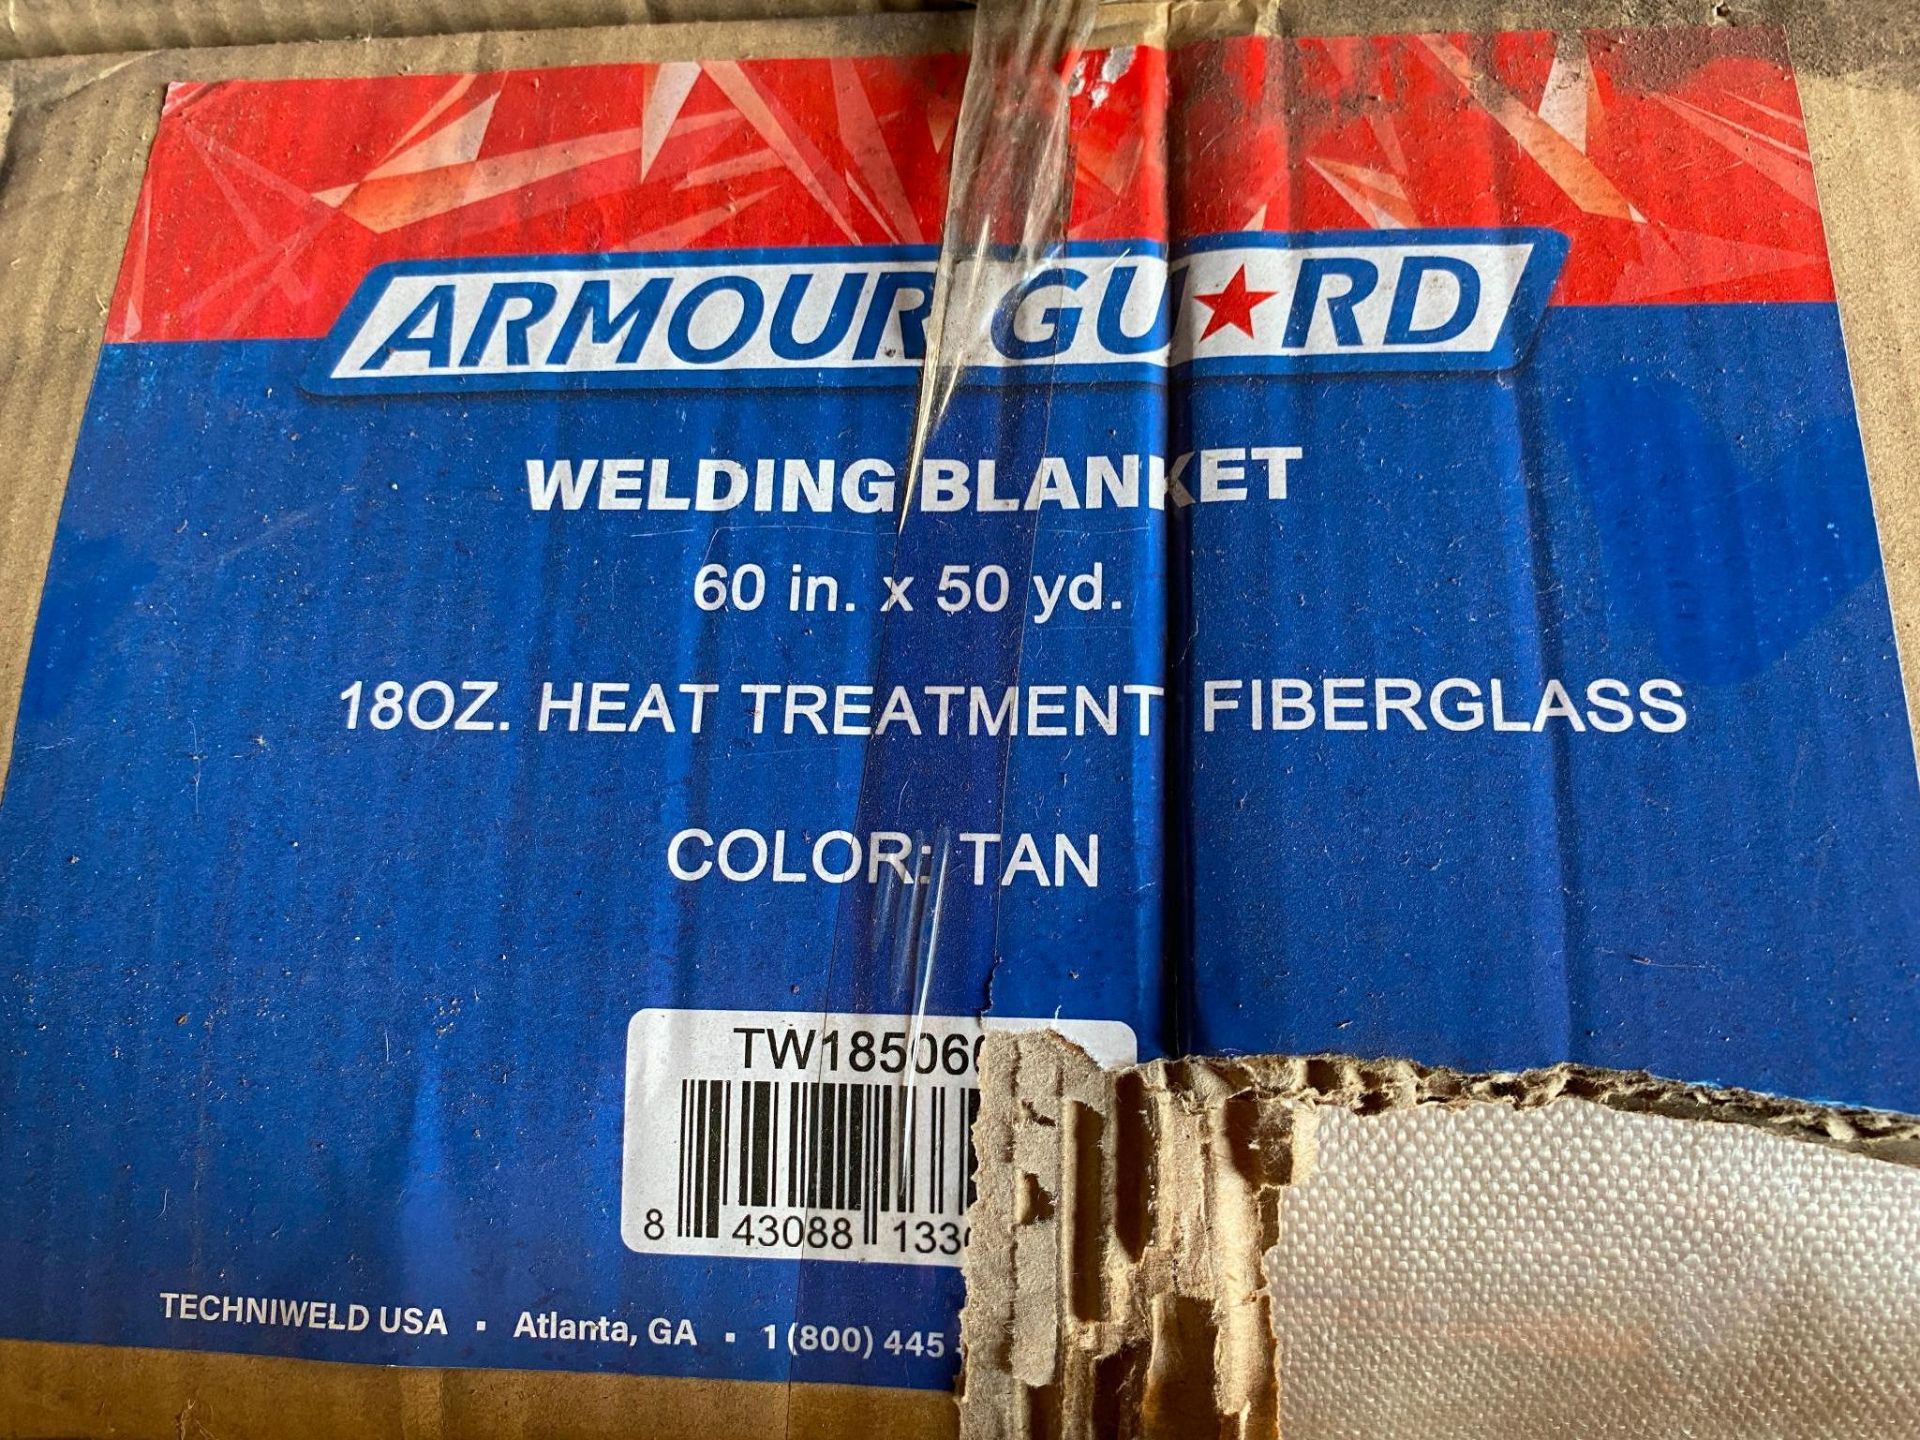 LOT CONSISTING OF: welding blanket, 6" x 50 yards, oxy./ acetylene hose sets, rod holder container, - Image 5 of 6